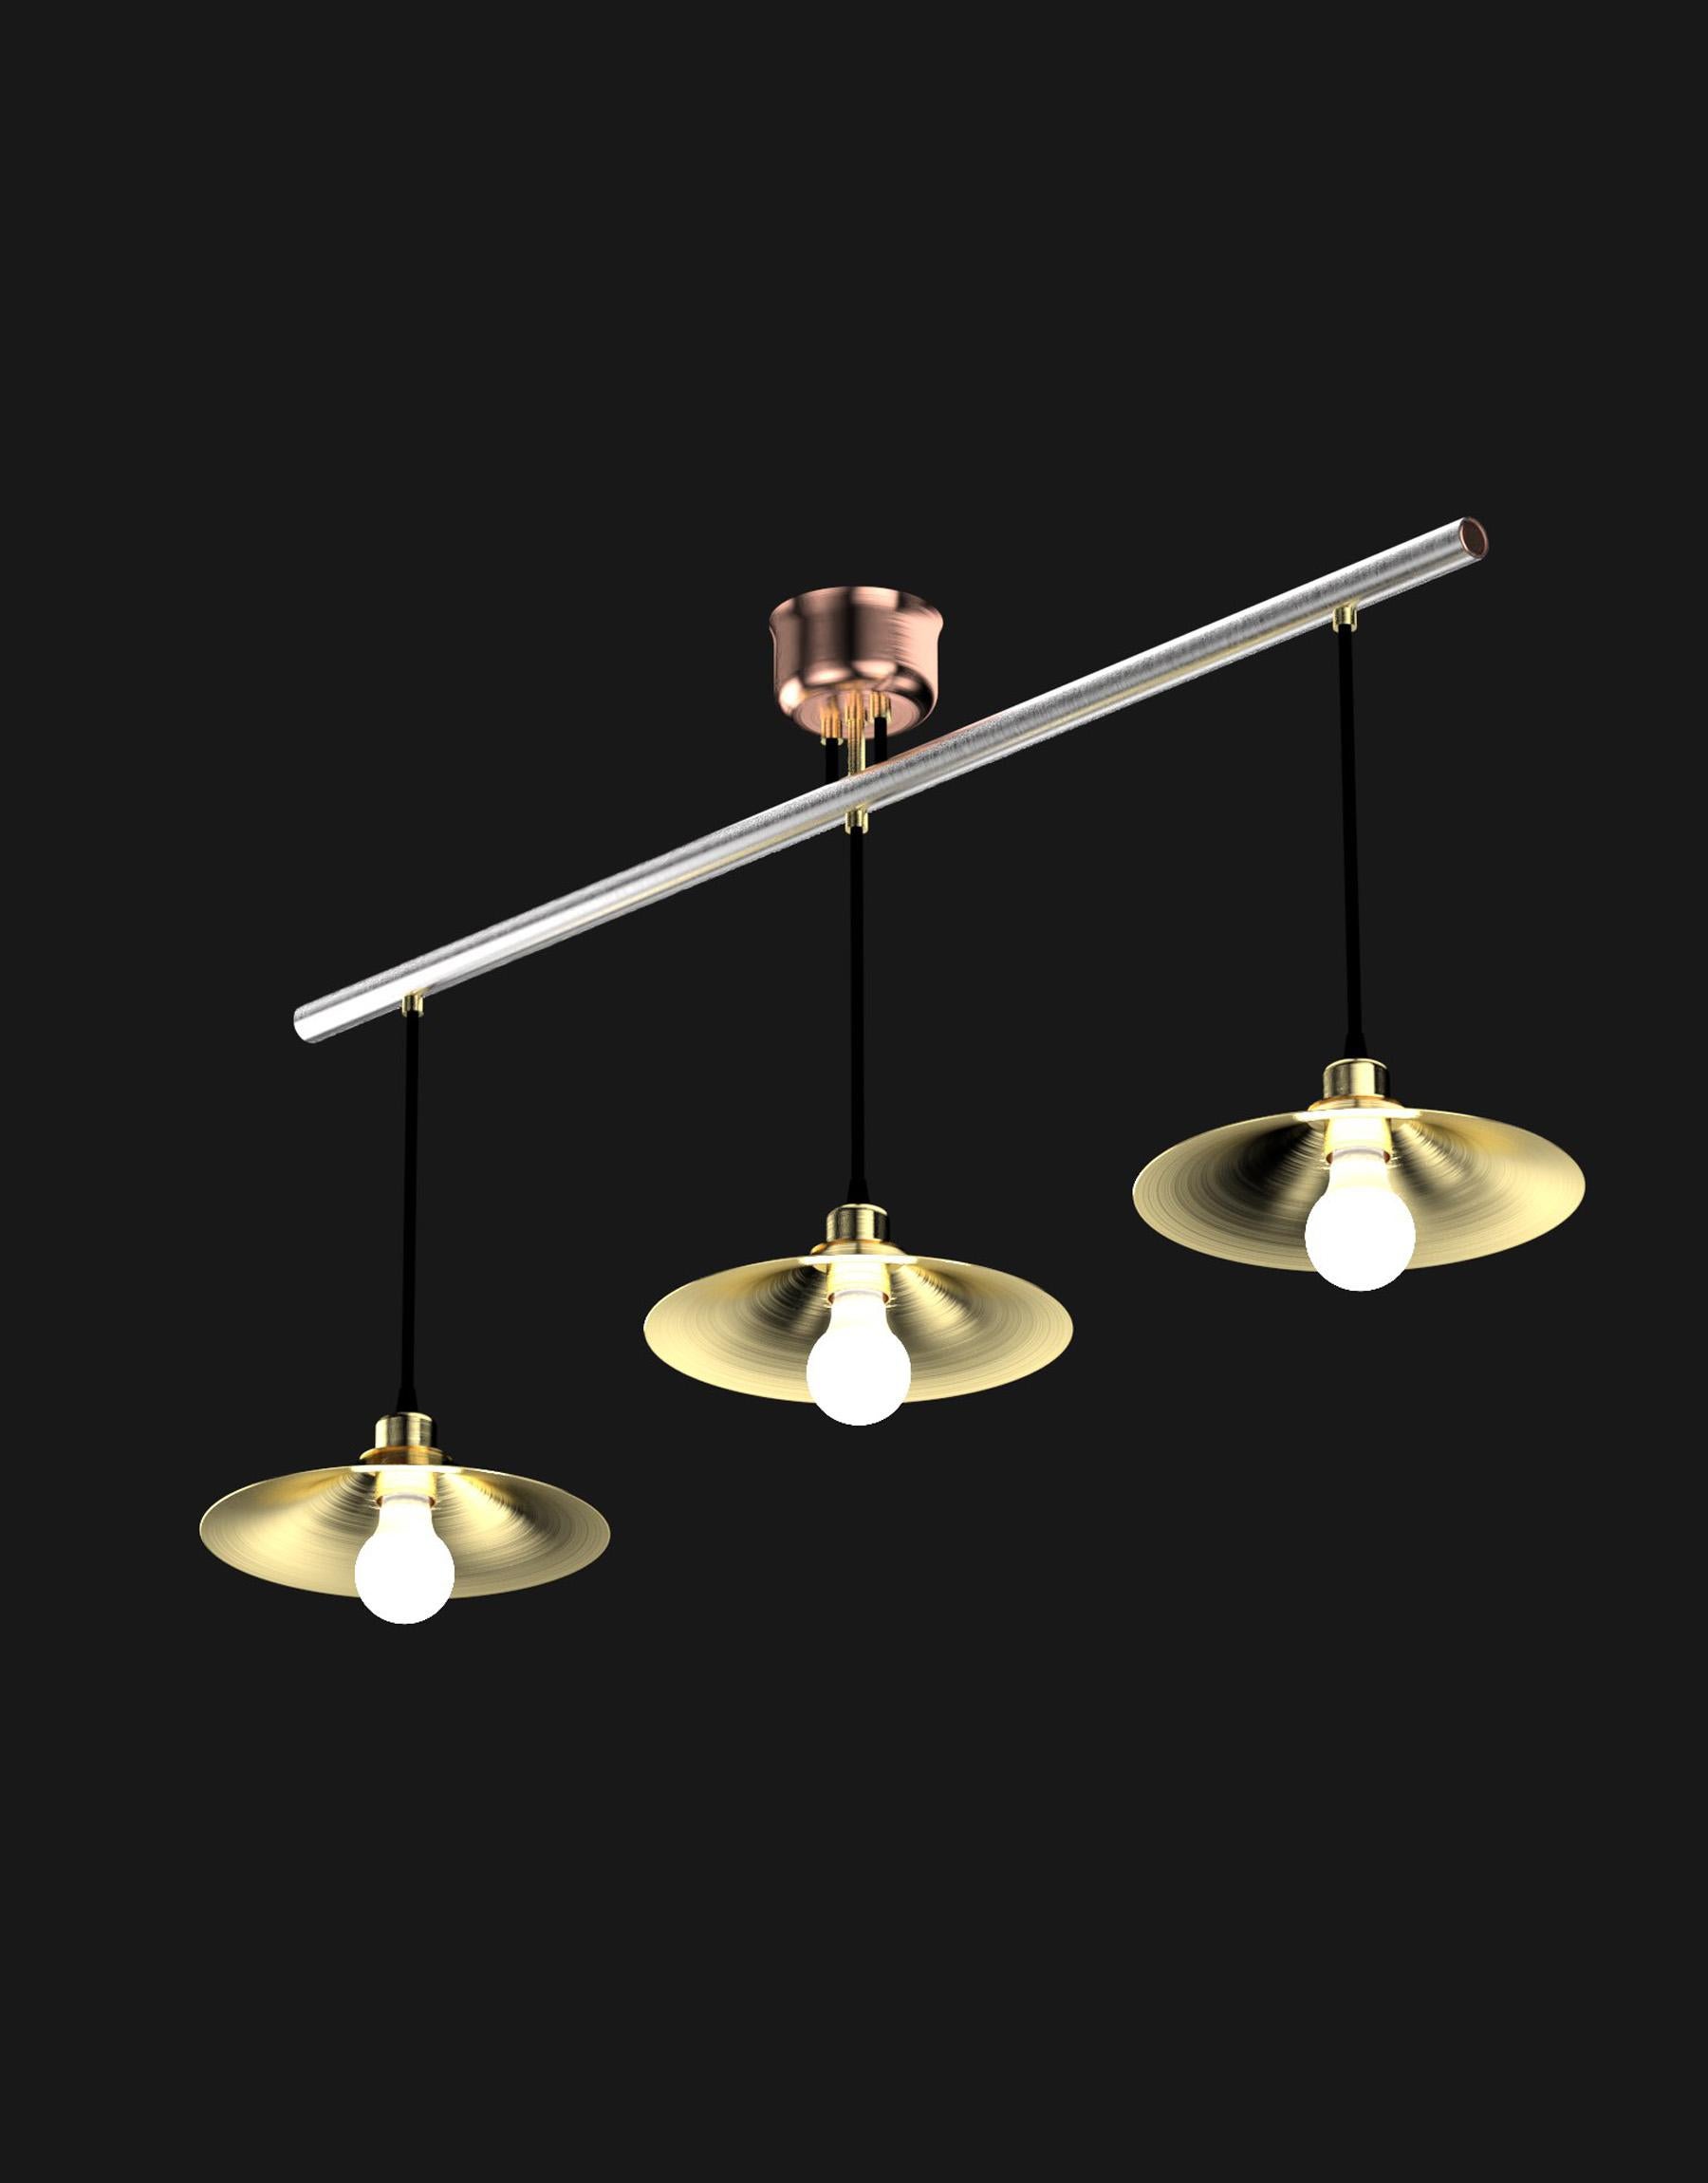 Industrial Edimate Genuine Stainless Steel/Brass Ceiling Light For Sale